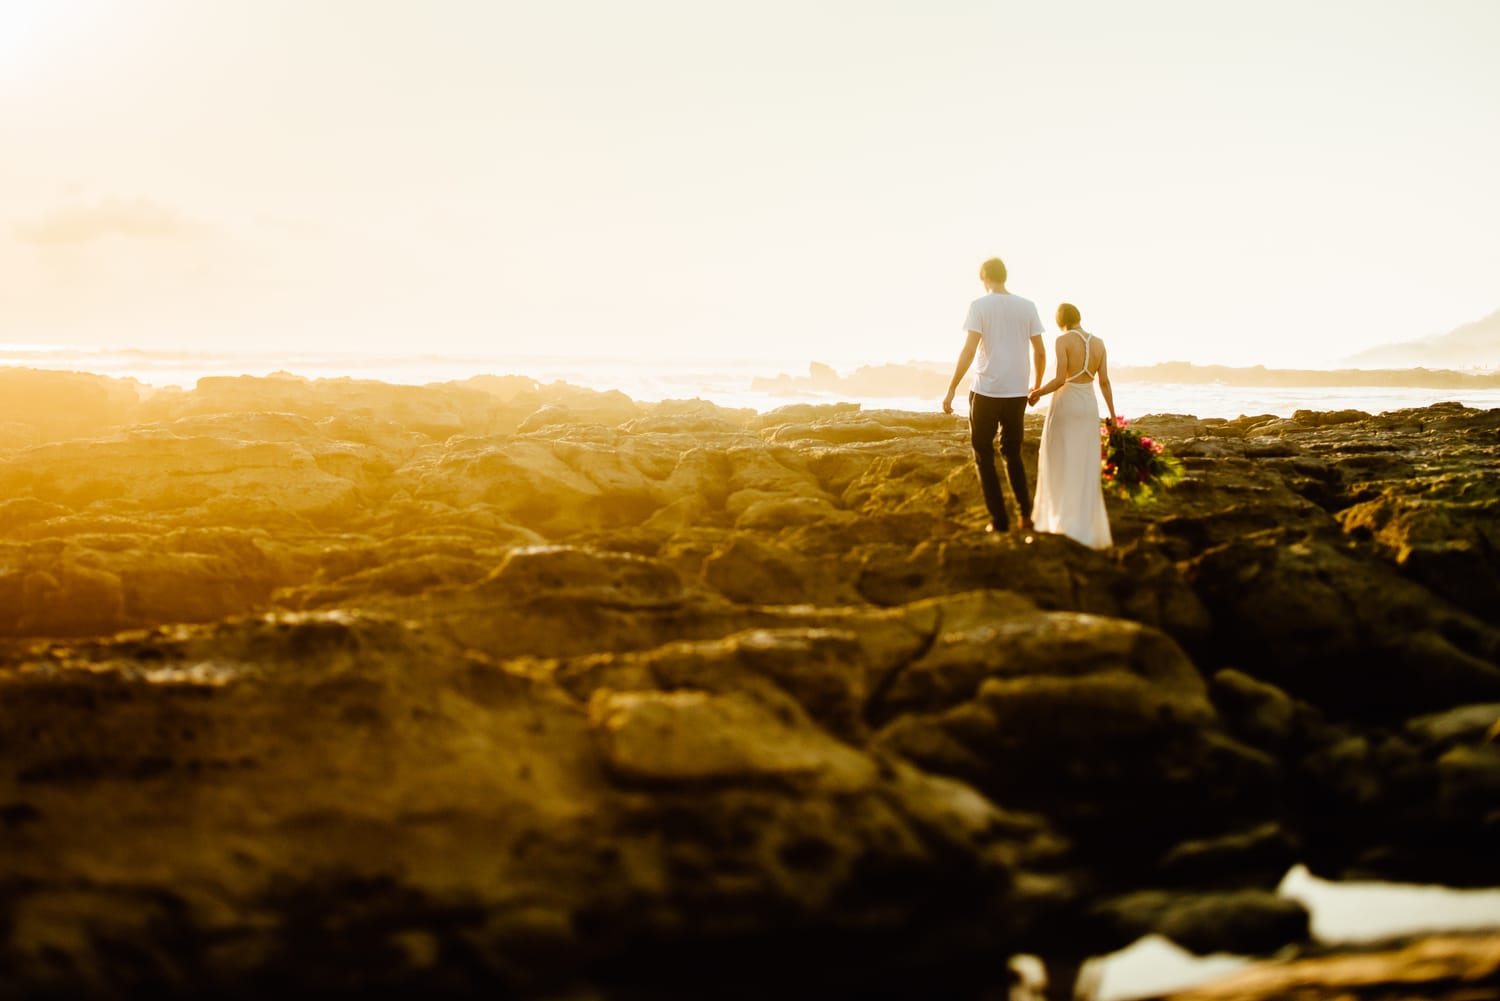 Bride and groom hold hands and walk across rocks along the shore in Santa Teresa, Costa Rica.